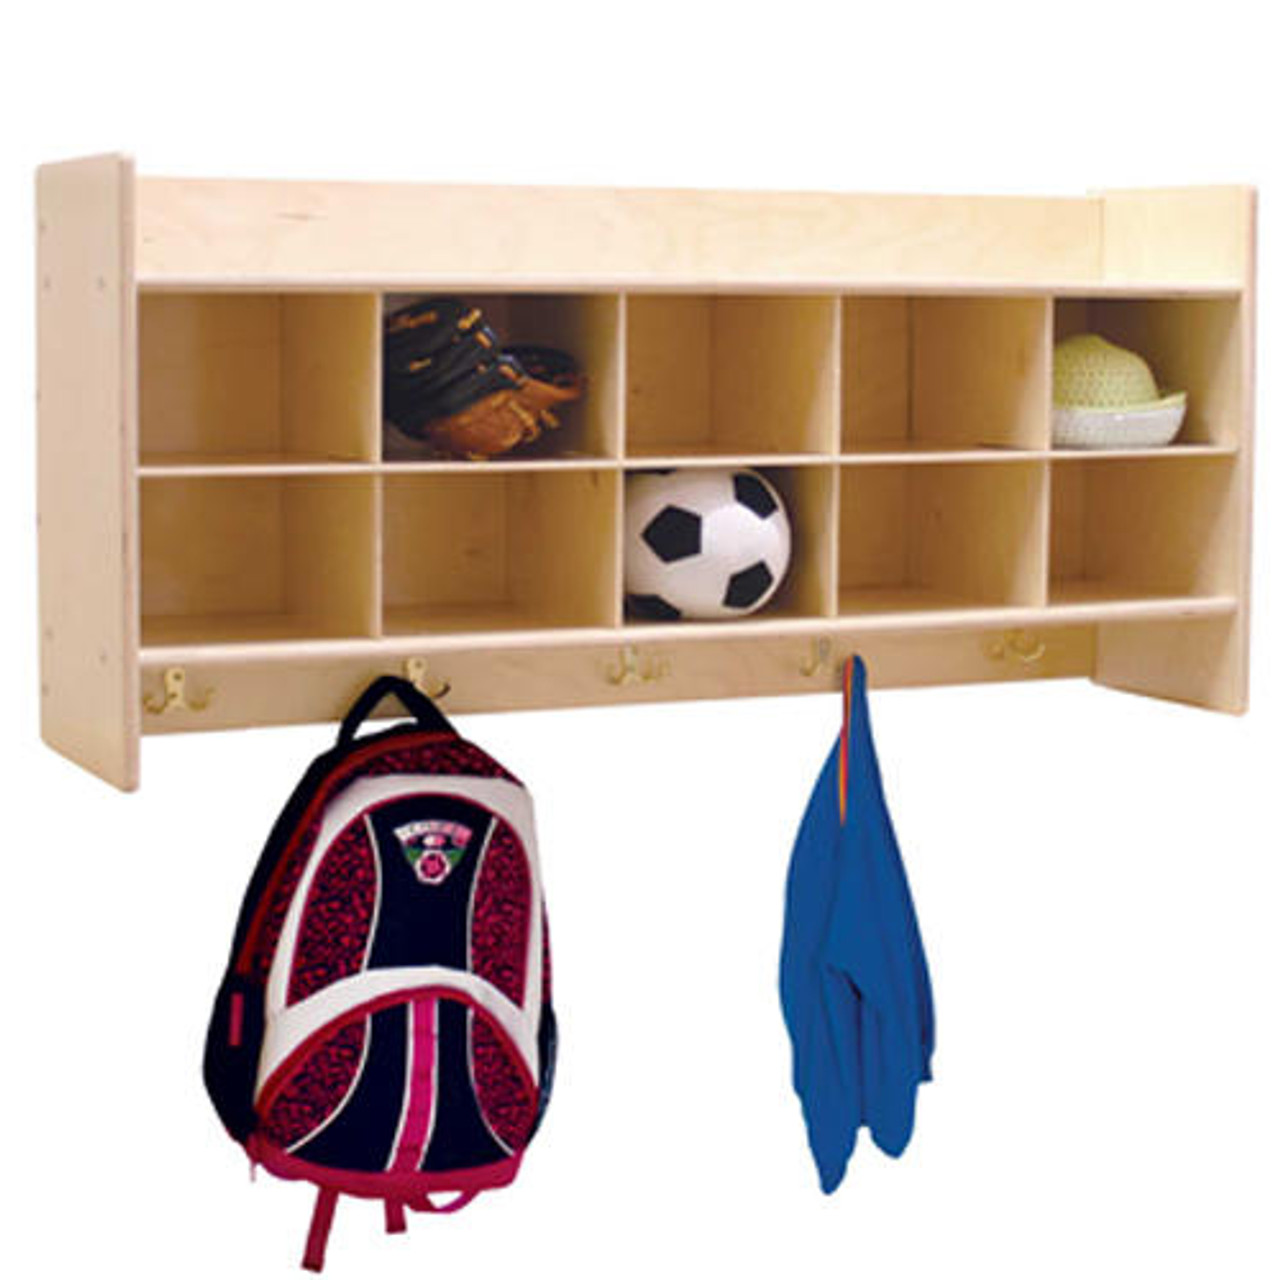 Contender Wall Hanging Storage Without Trays - Assembled